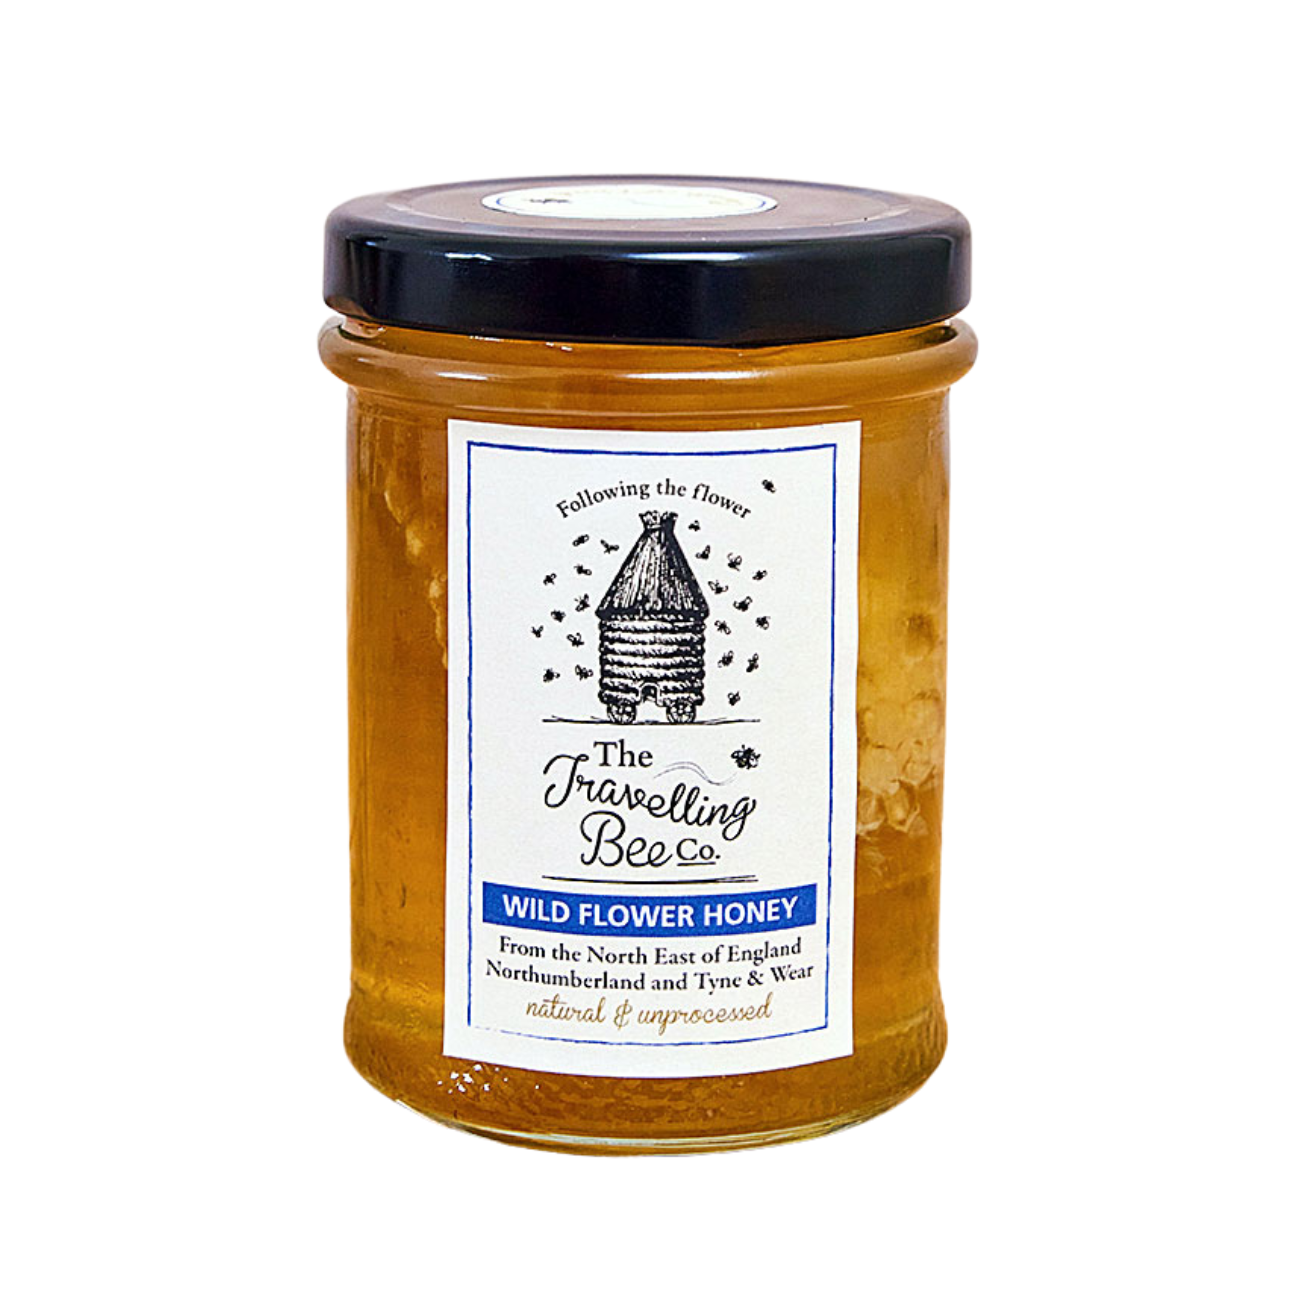 Wild Flower Honey with Honeycomb (North East England) 227g